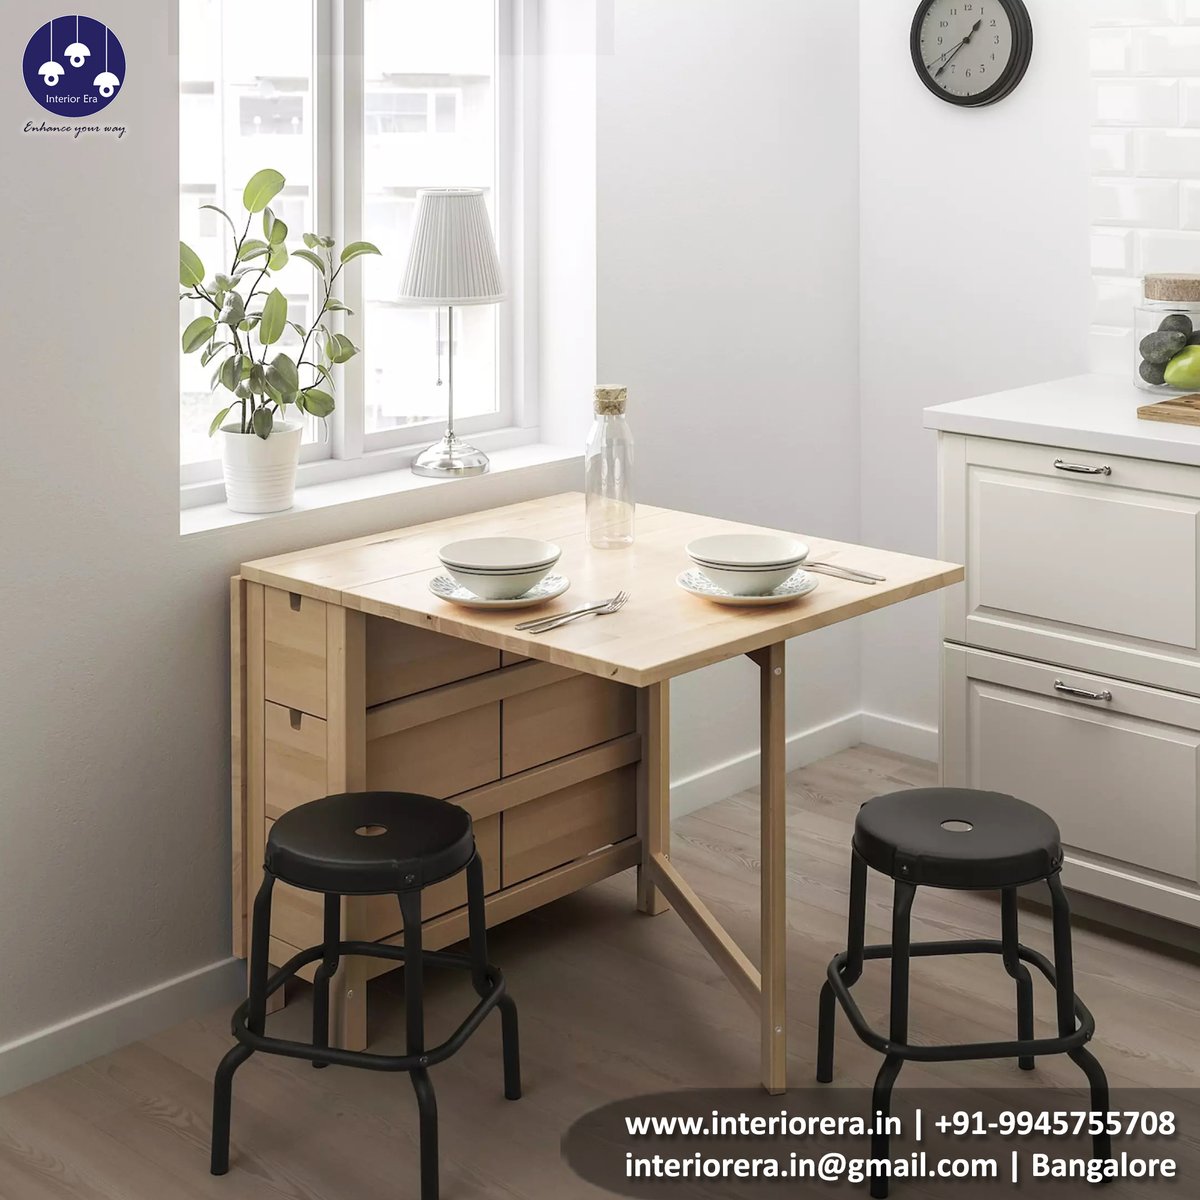 Standout Ways to Elevate Your Dining Room Decor...!

#home #homedecor #homedesign #dining #DiningTableSet #diningroom #diningroomdecor #interior #interiors #interiordesign #interiordesigner #interiorstyling #Interior_Design #interiordreams #InteriorConference #bangalore #ecity